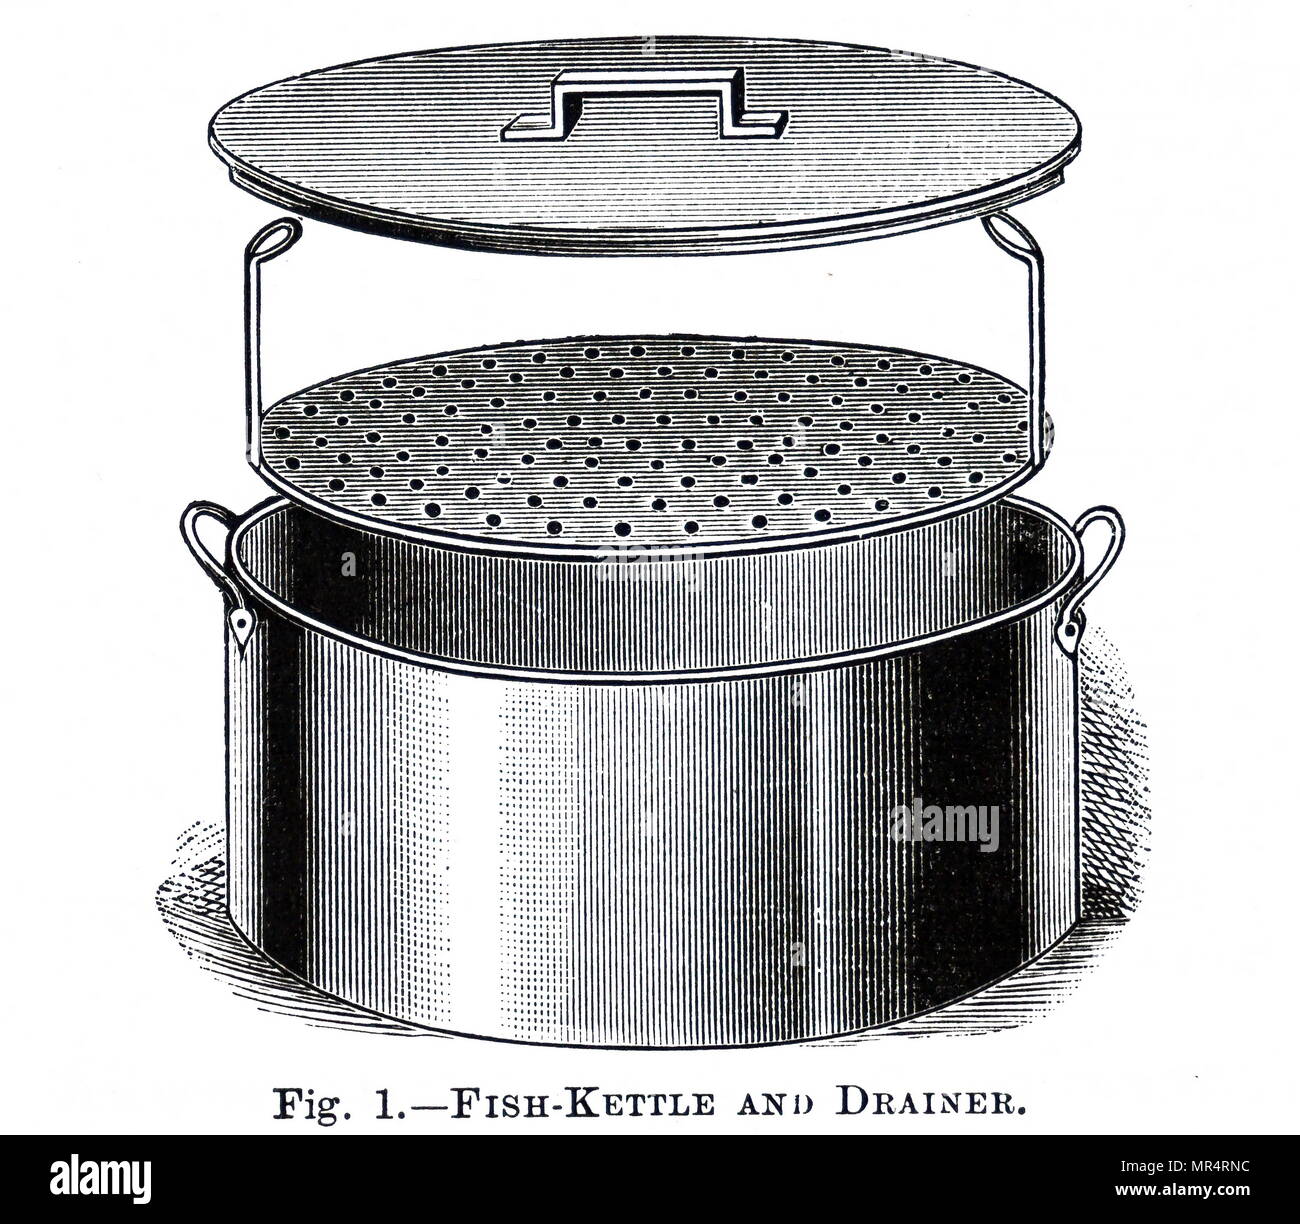 https://c8.alamy.com/comp/MR4RNC/engraving-depicting-a-fish-pot-a-kind-of-large-oval-shaped-kettle-used-for-cooking-whole-fish-owing-to-their-necessarily-unwieldy-size-fish-kettles-usually-have-racks-and-handles-and-notably-tight-fitting-lids-dated-19th-century-MR4RNC.jpg